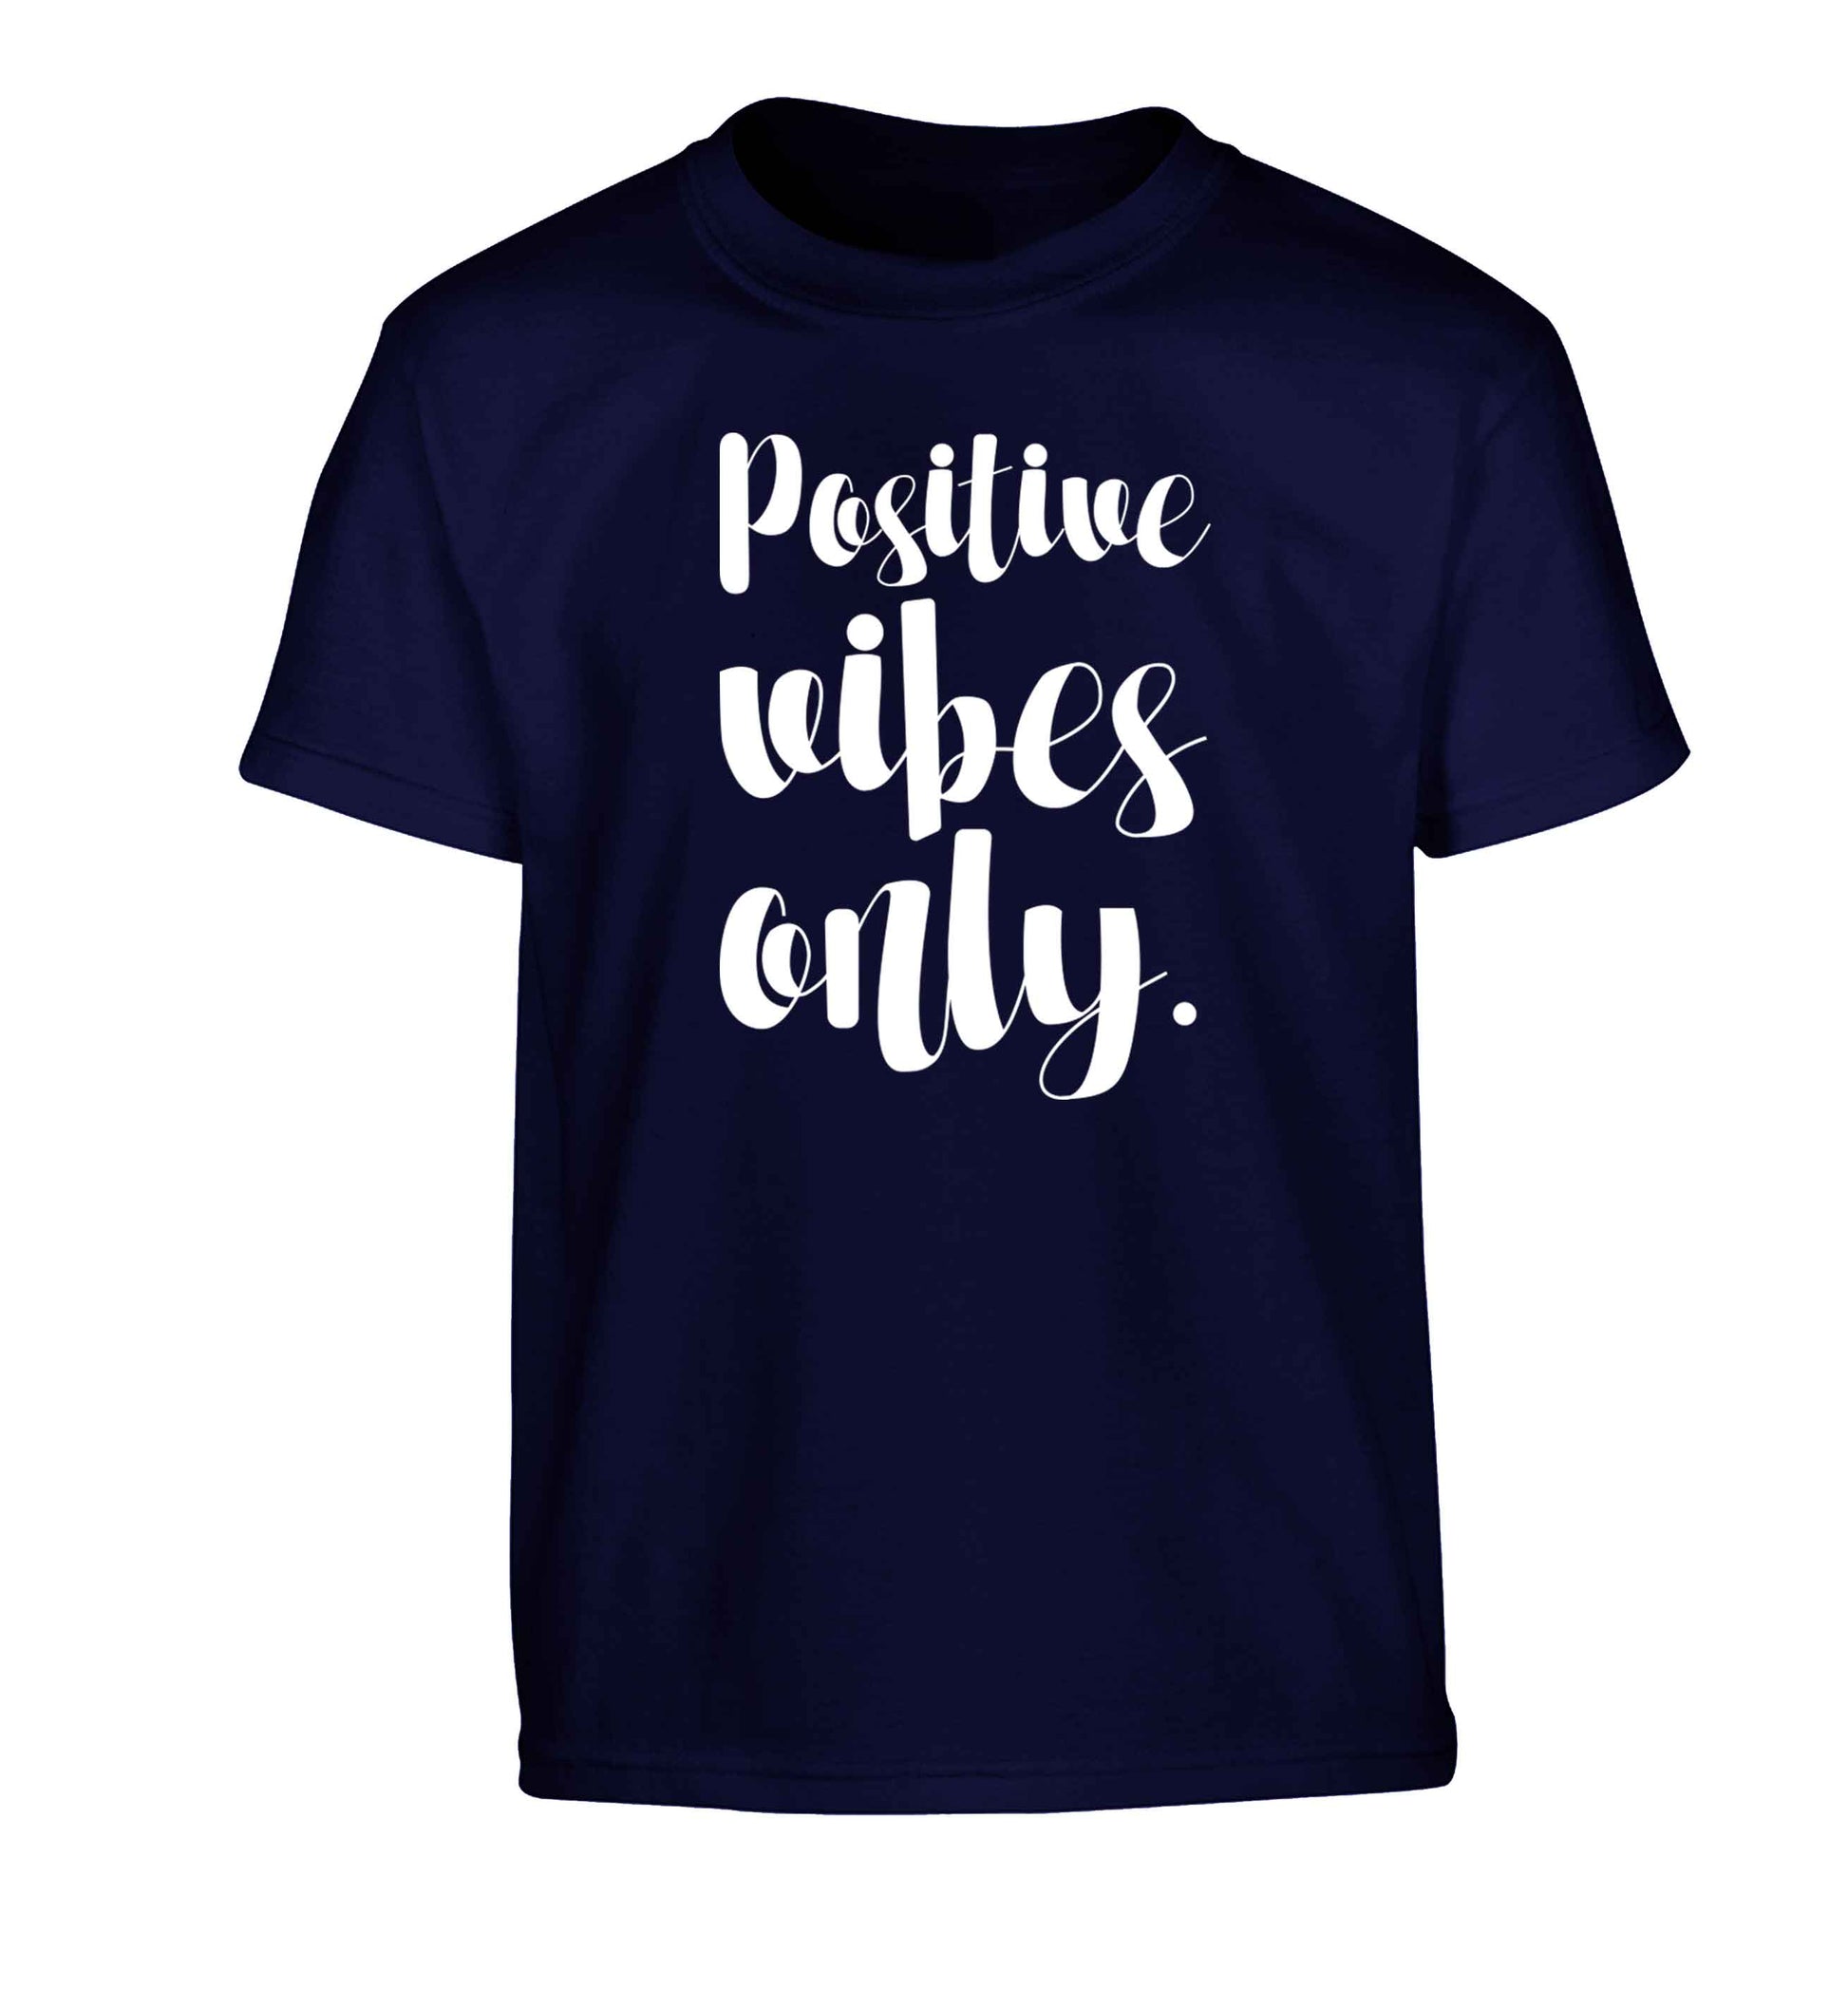 Positive vibes only Children's navy Tshirt 12-13 Years